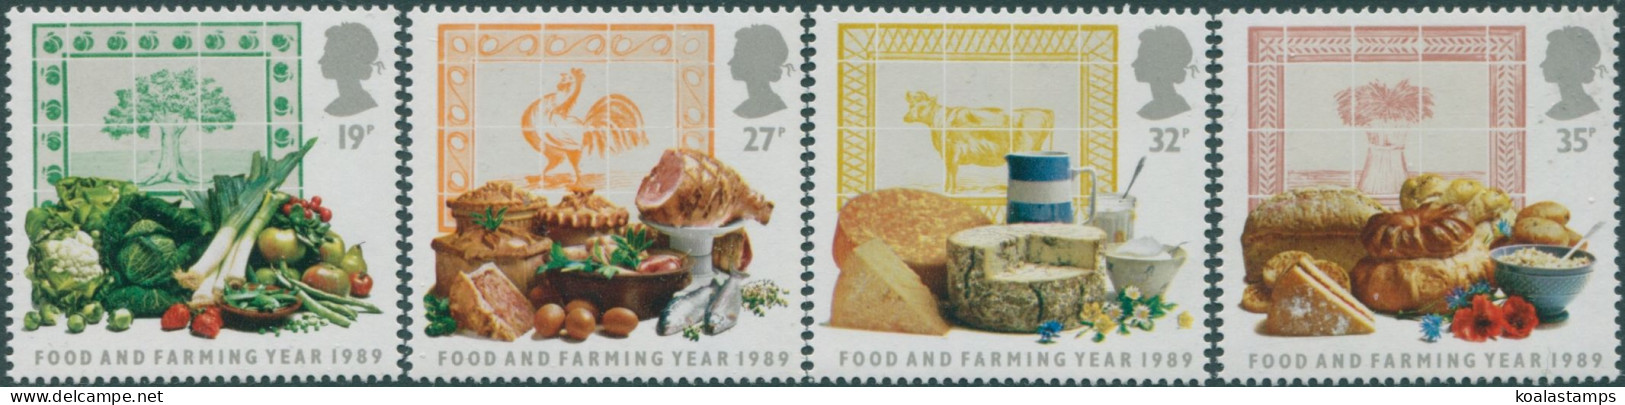 Great Britain 1989 SG1428-1431 QEII Food And Farming MNH - Unclassified